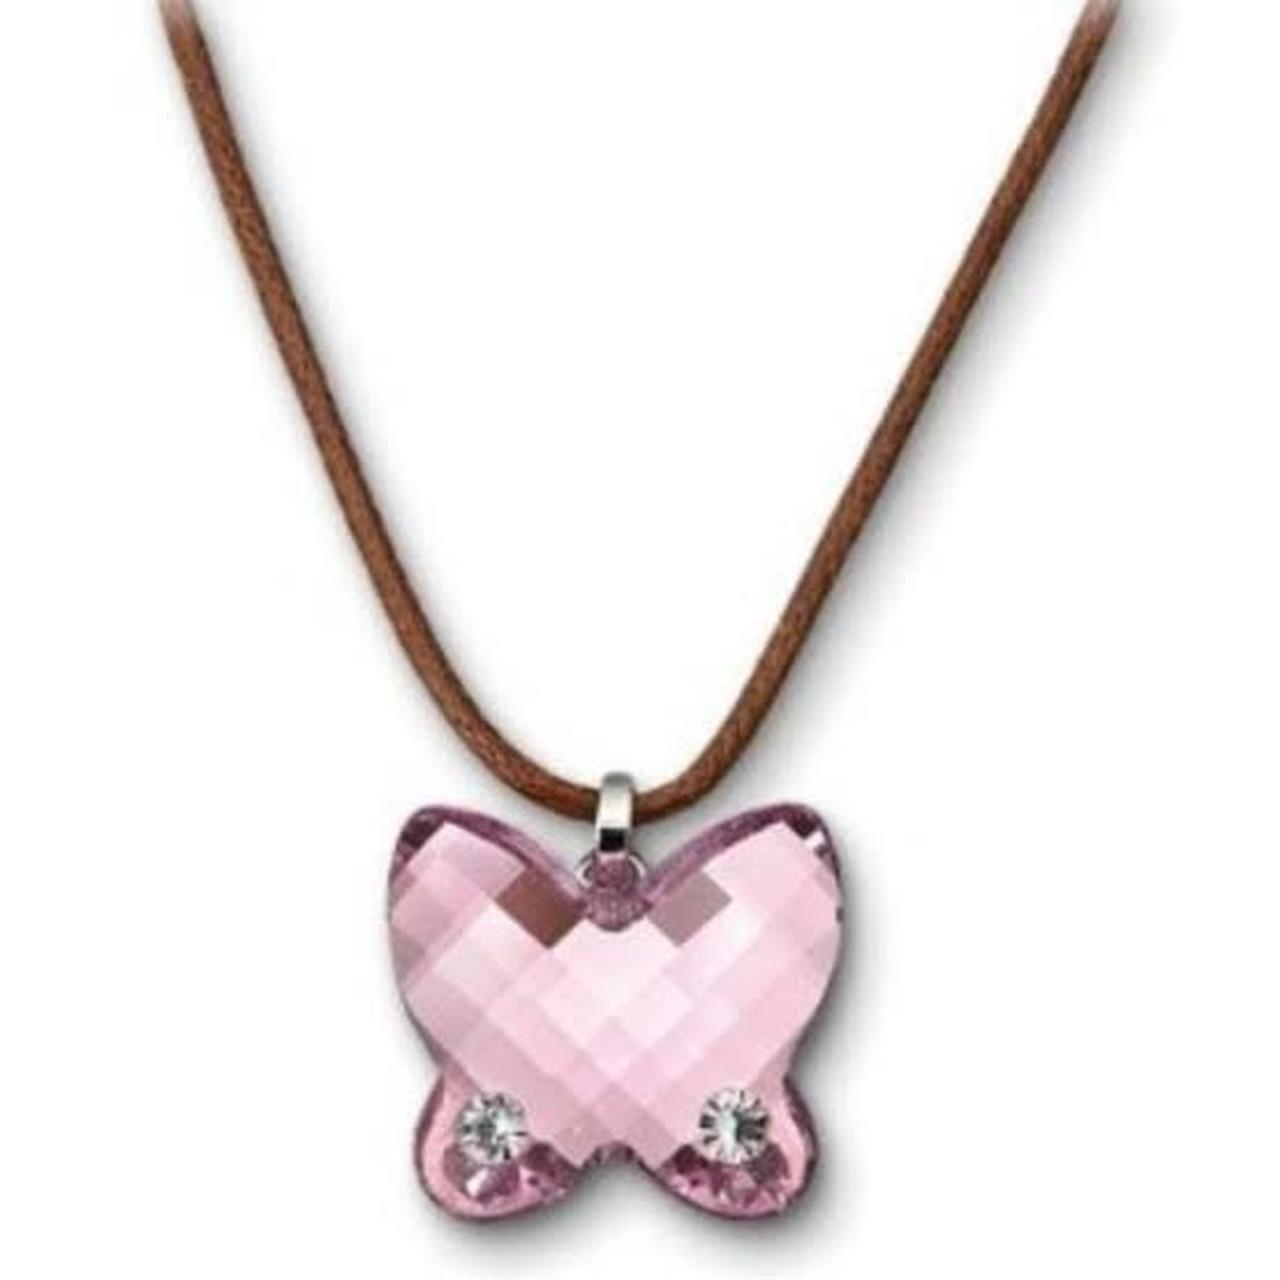 Swarovski Magnetic Necklace, Multi-colored, Mixed metal finish 5416786 -  Morré Lyons Jewelers